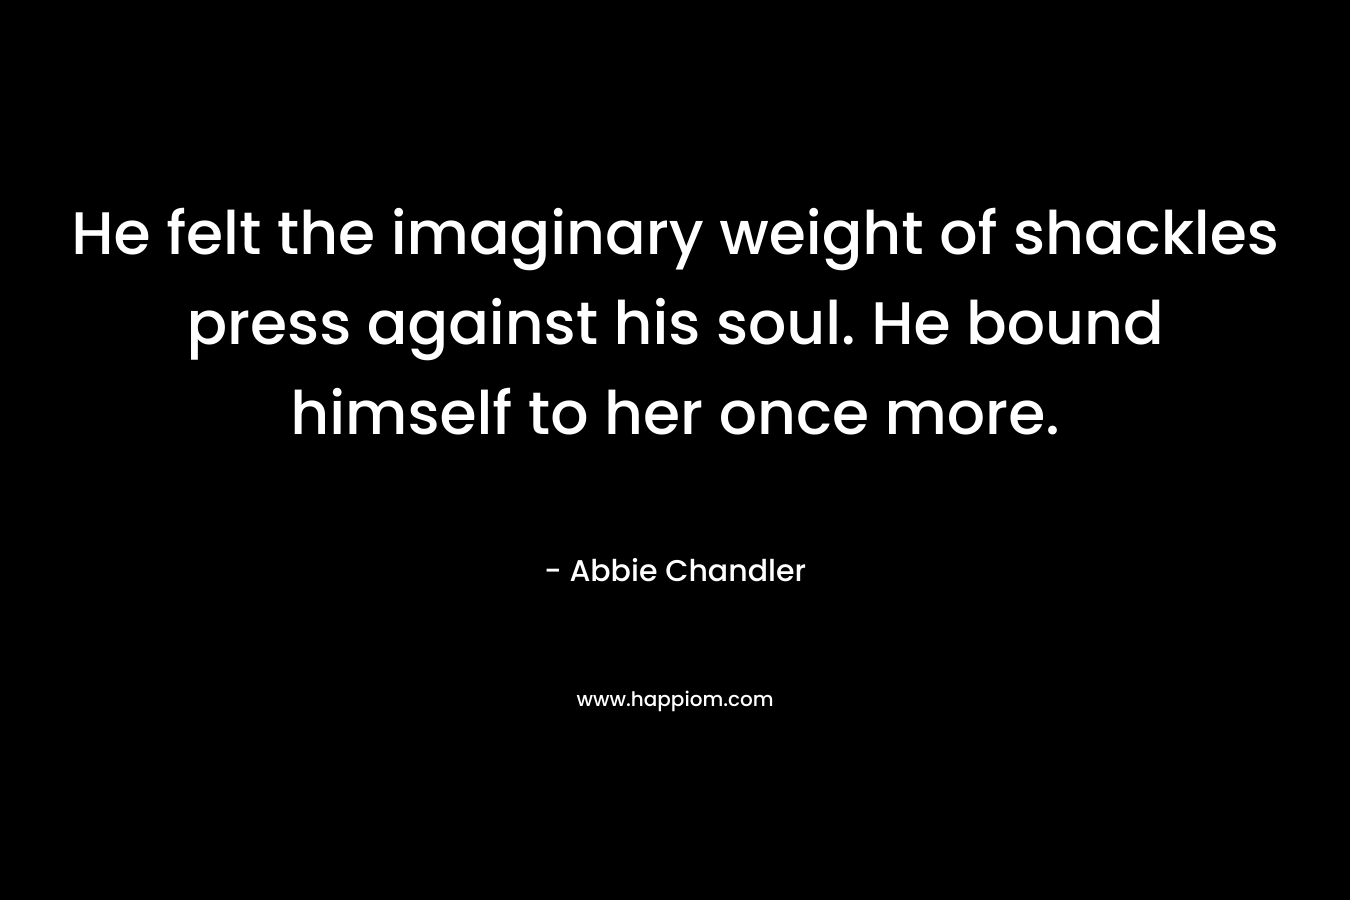 He felt the imaginary weight of shackles press against his soul. He bound himself to her once more.